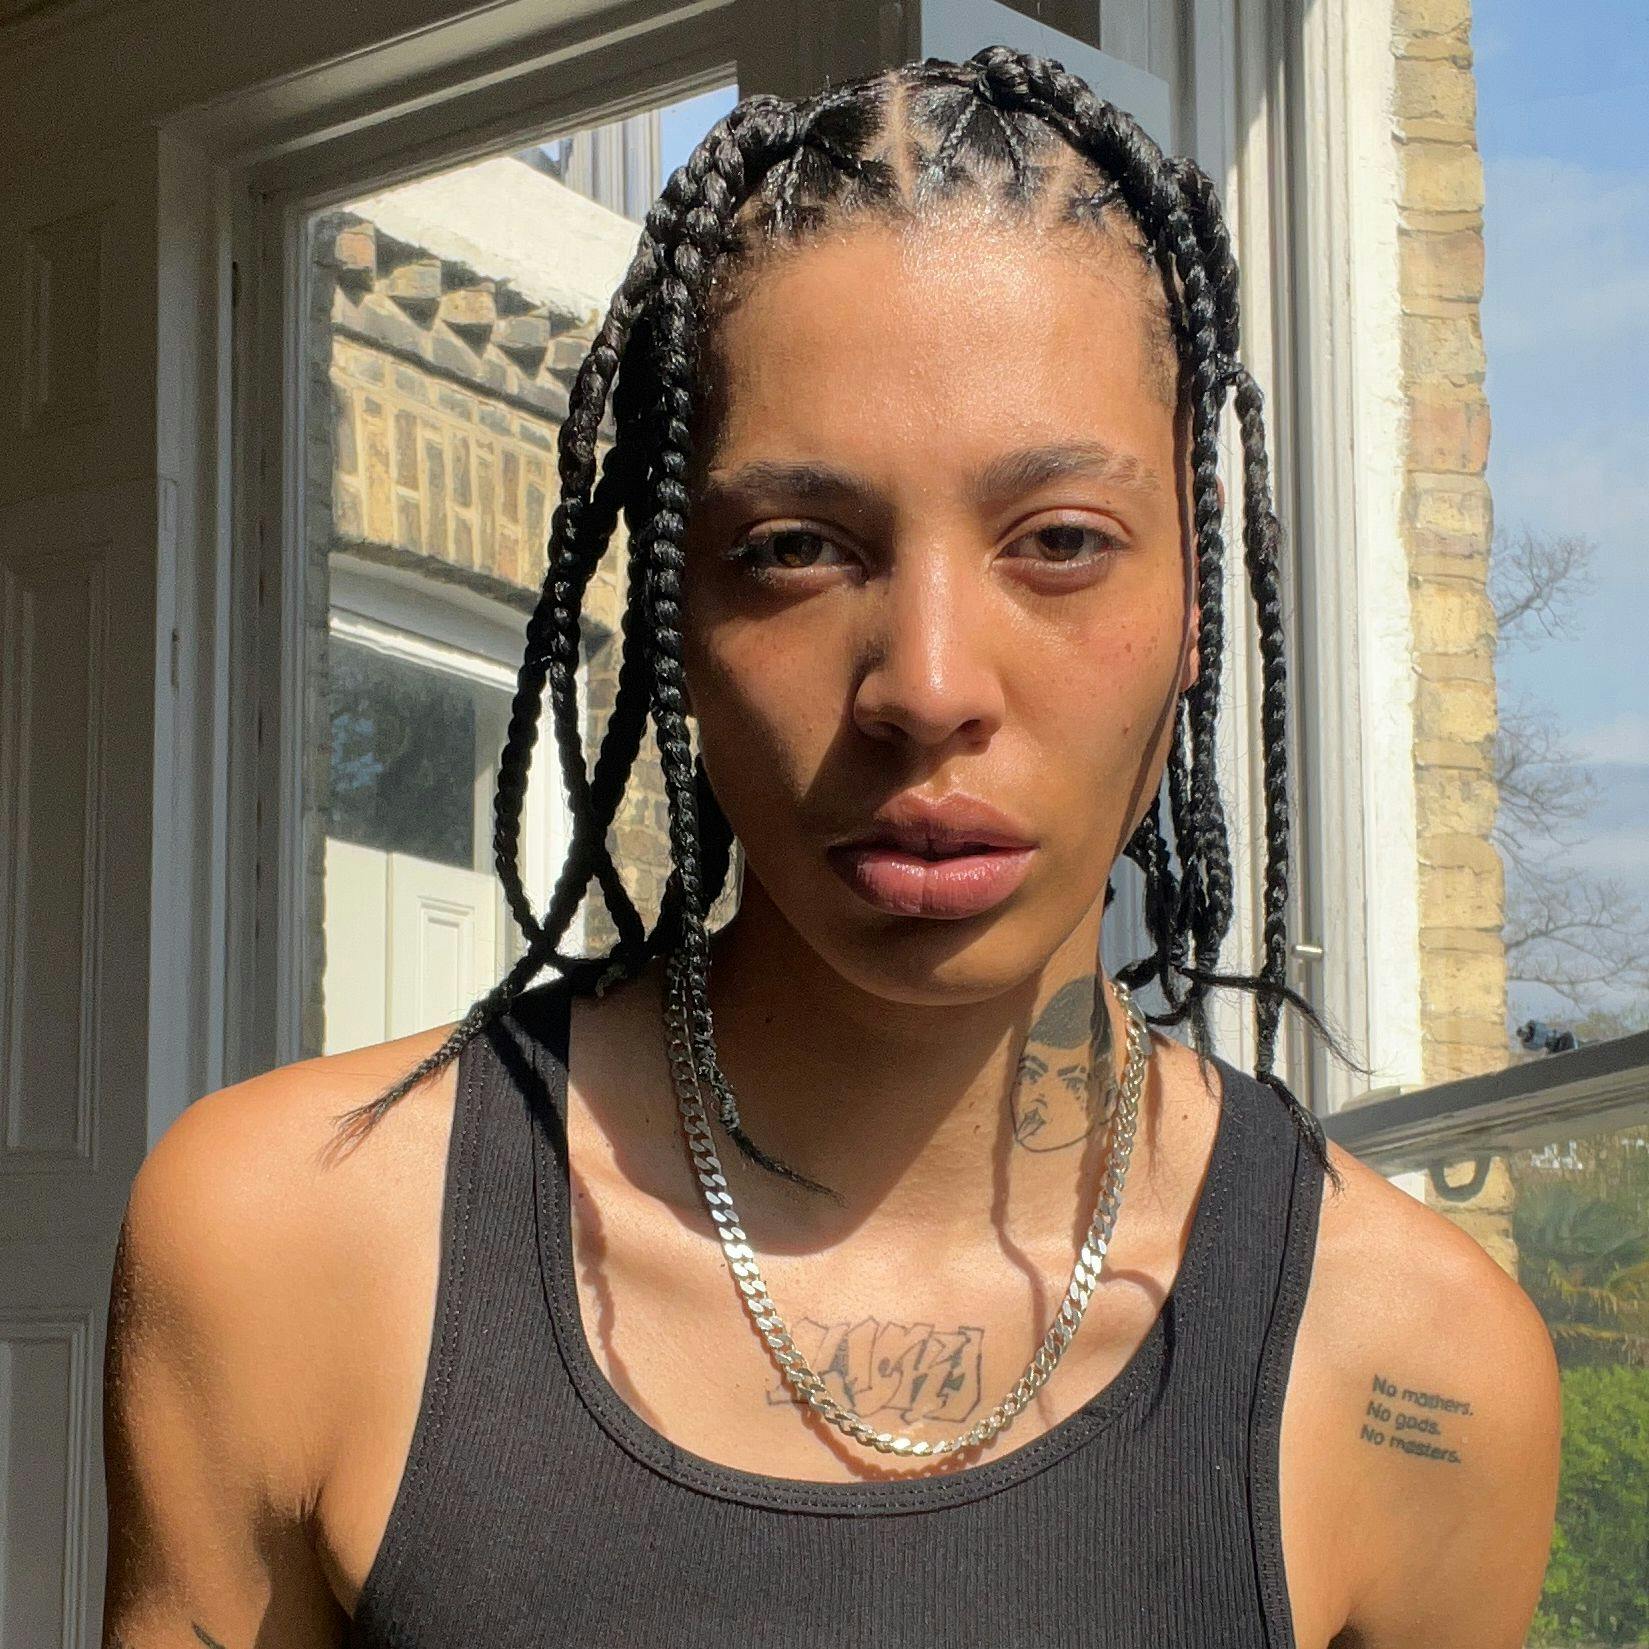 Kai facing the camera with soft shadows across their face, wearing a black tank top and silver chain, tattoos visible on their neck and arms.